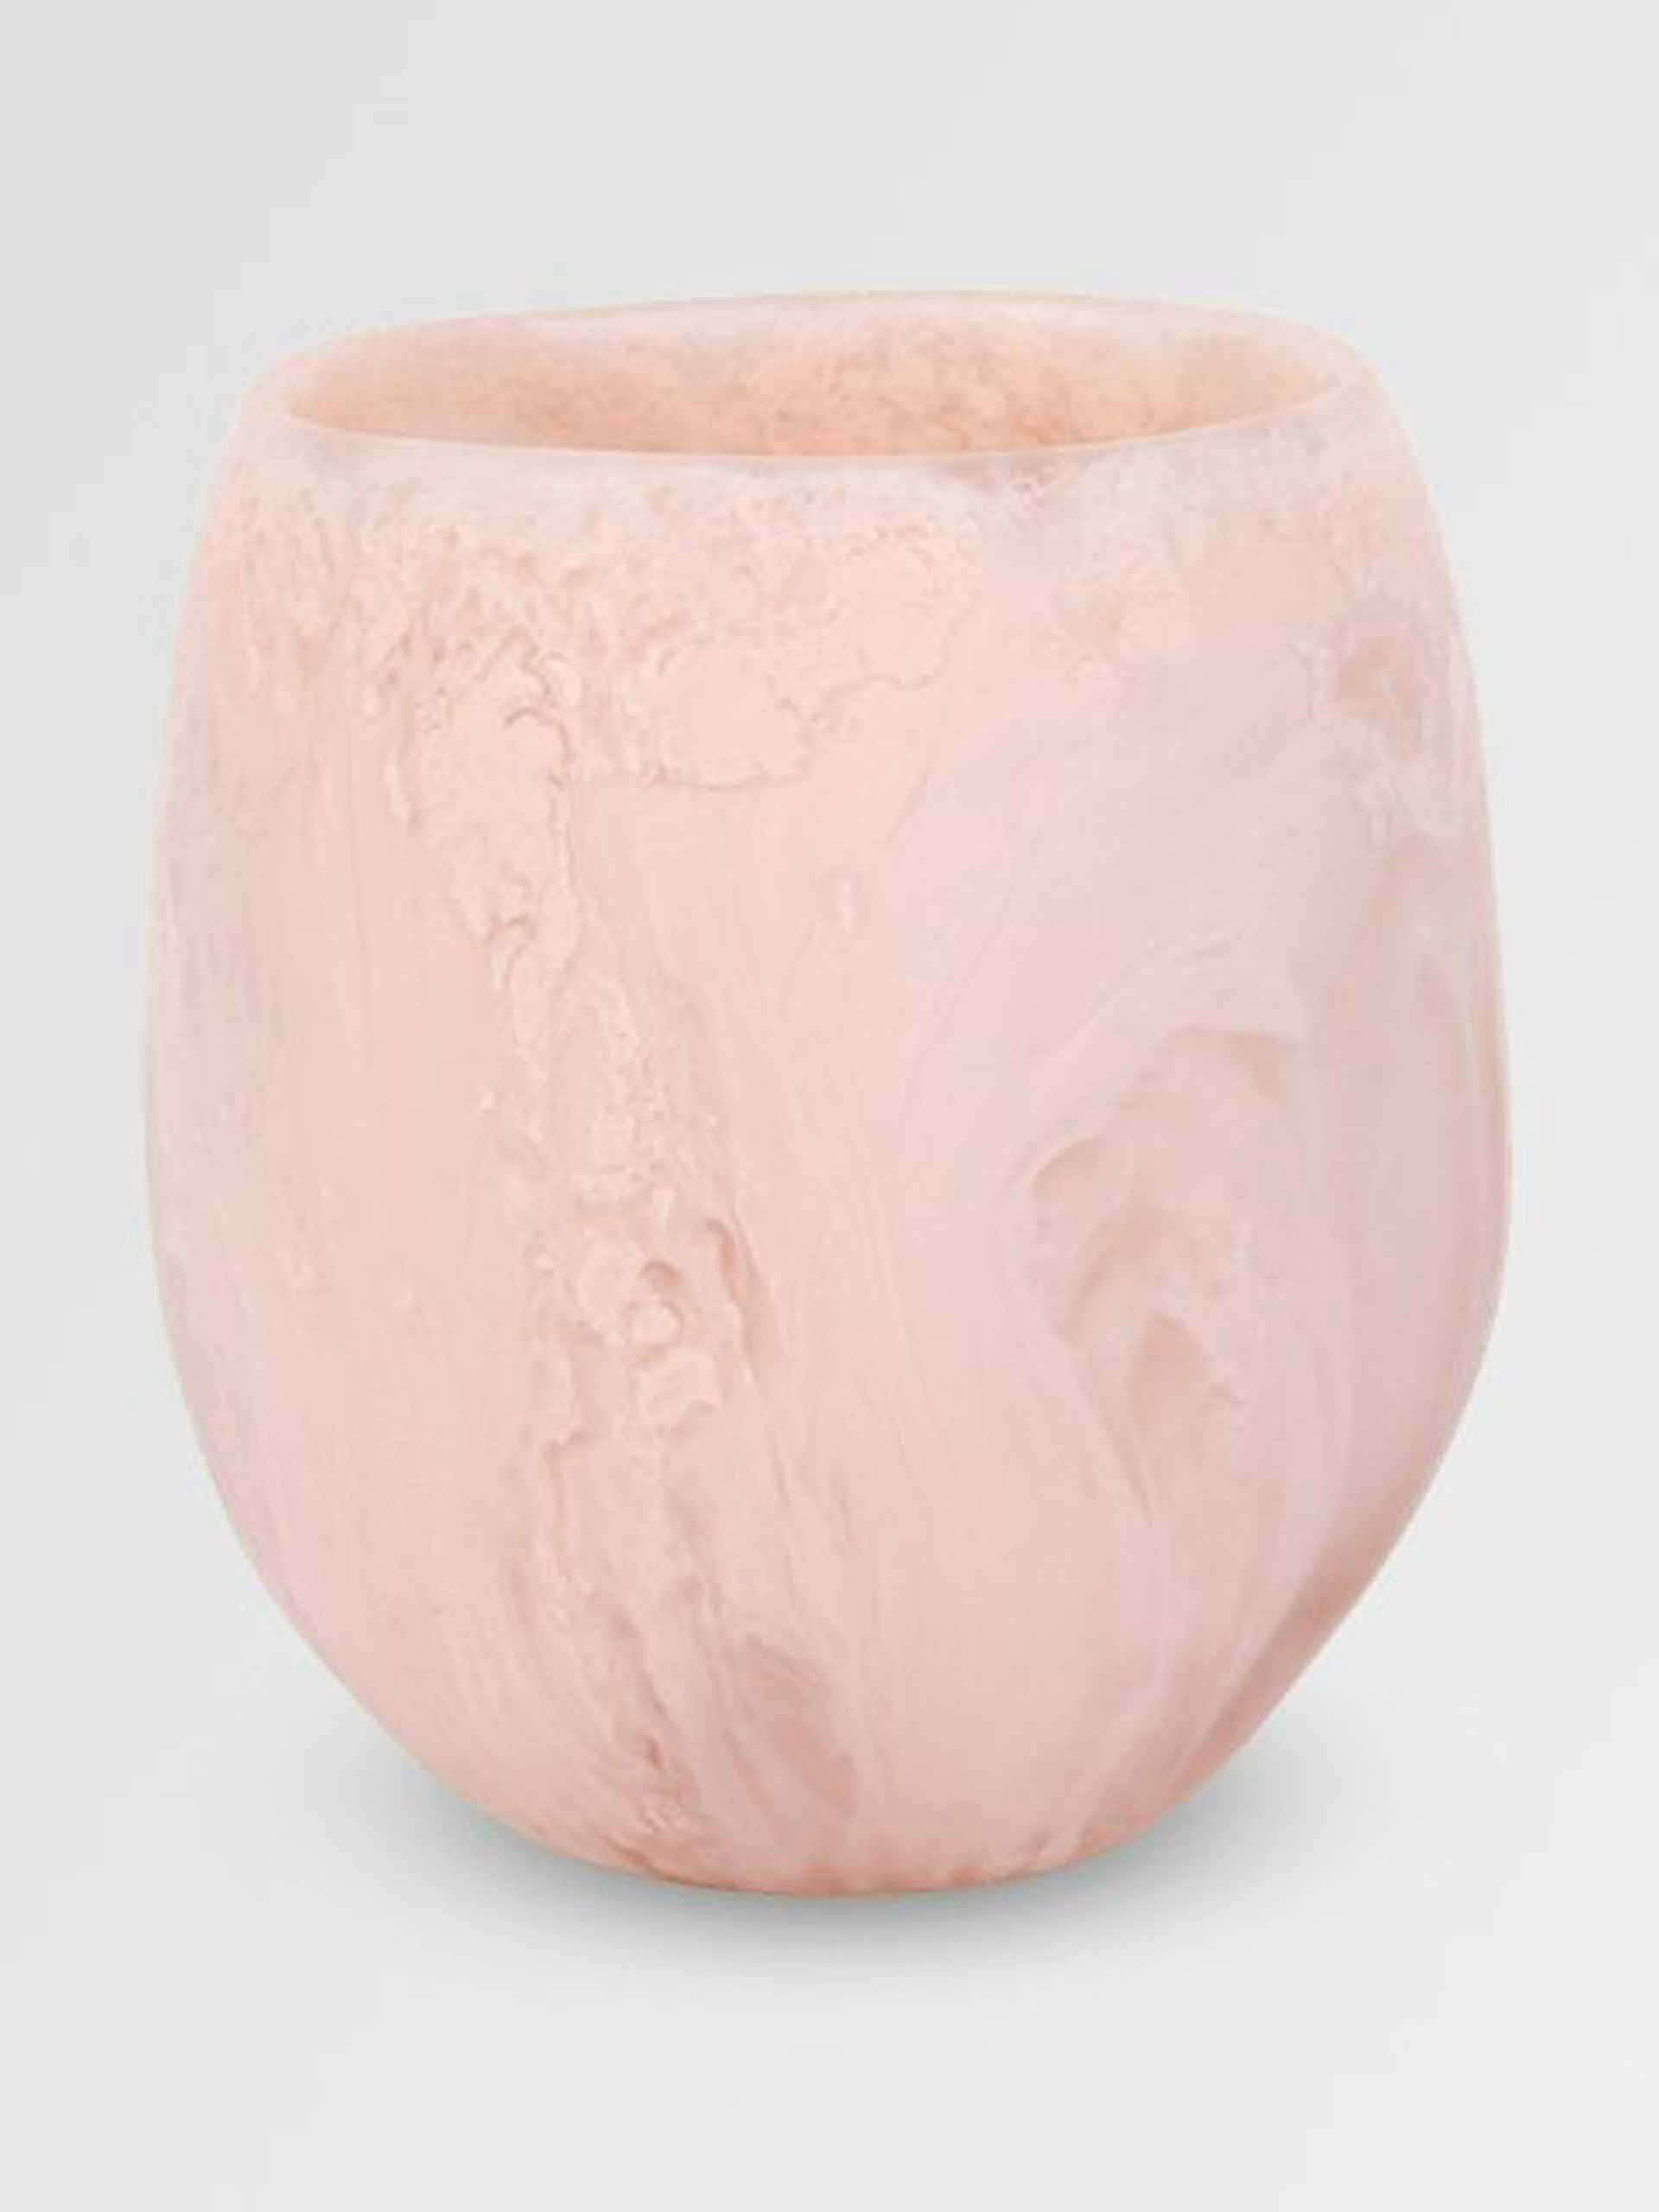 Large pink resin rock cup